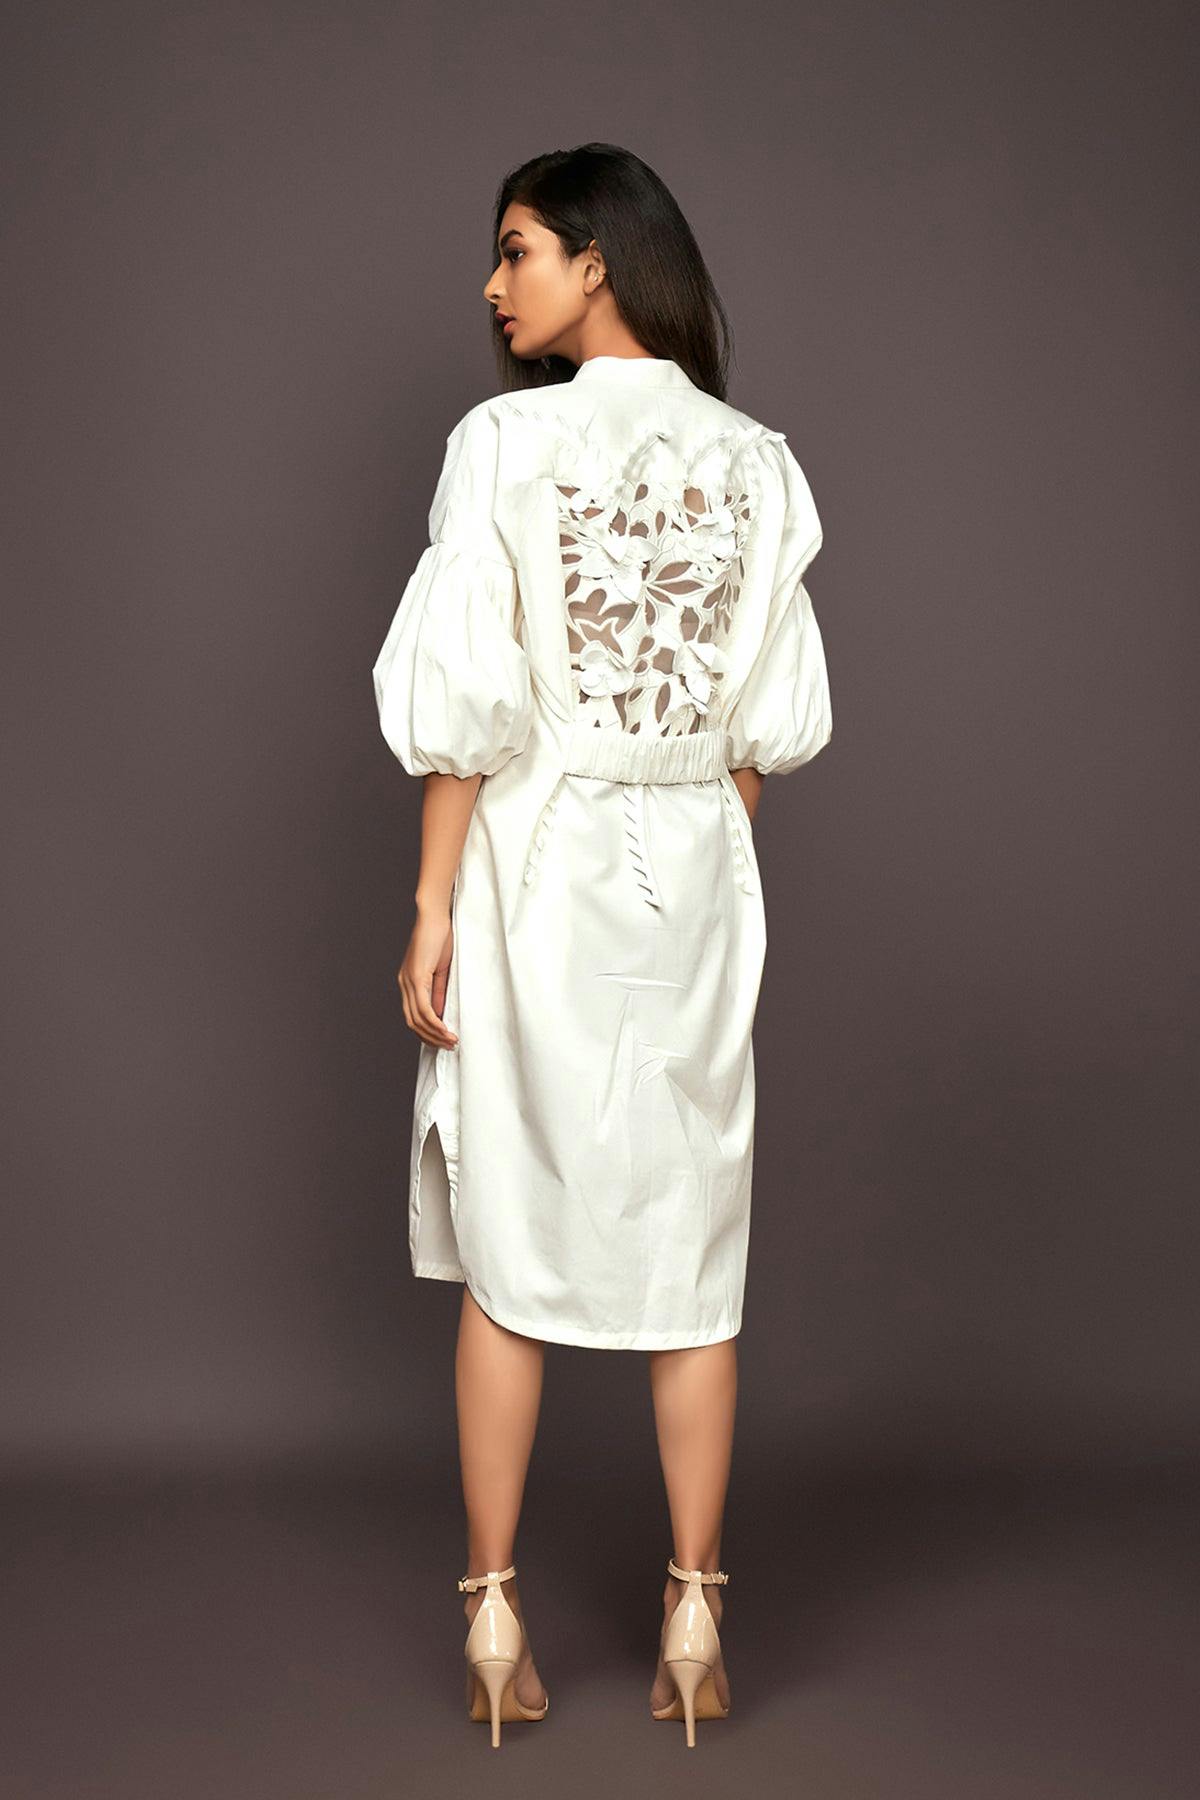 NN-1127-W ::: White Shirt Dress With Layered Sleeves, a product by Deepika Arora